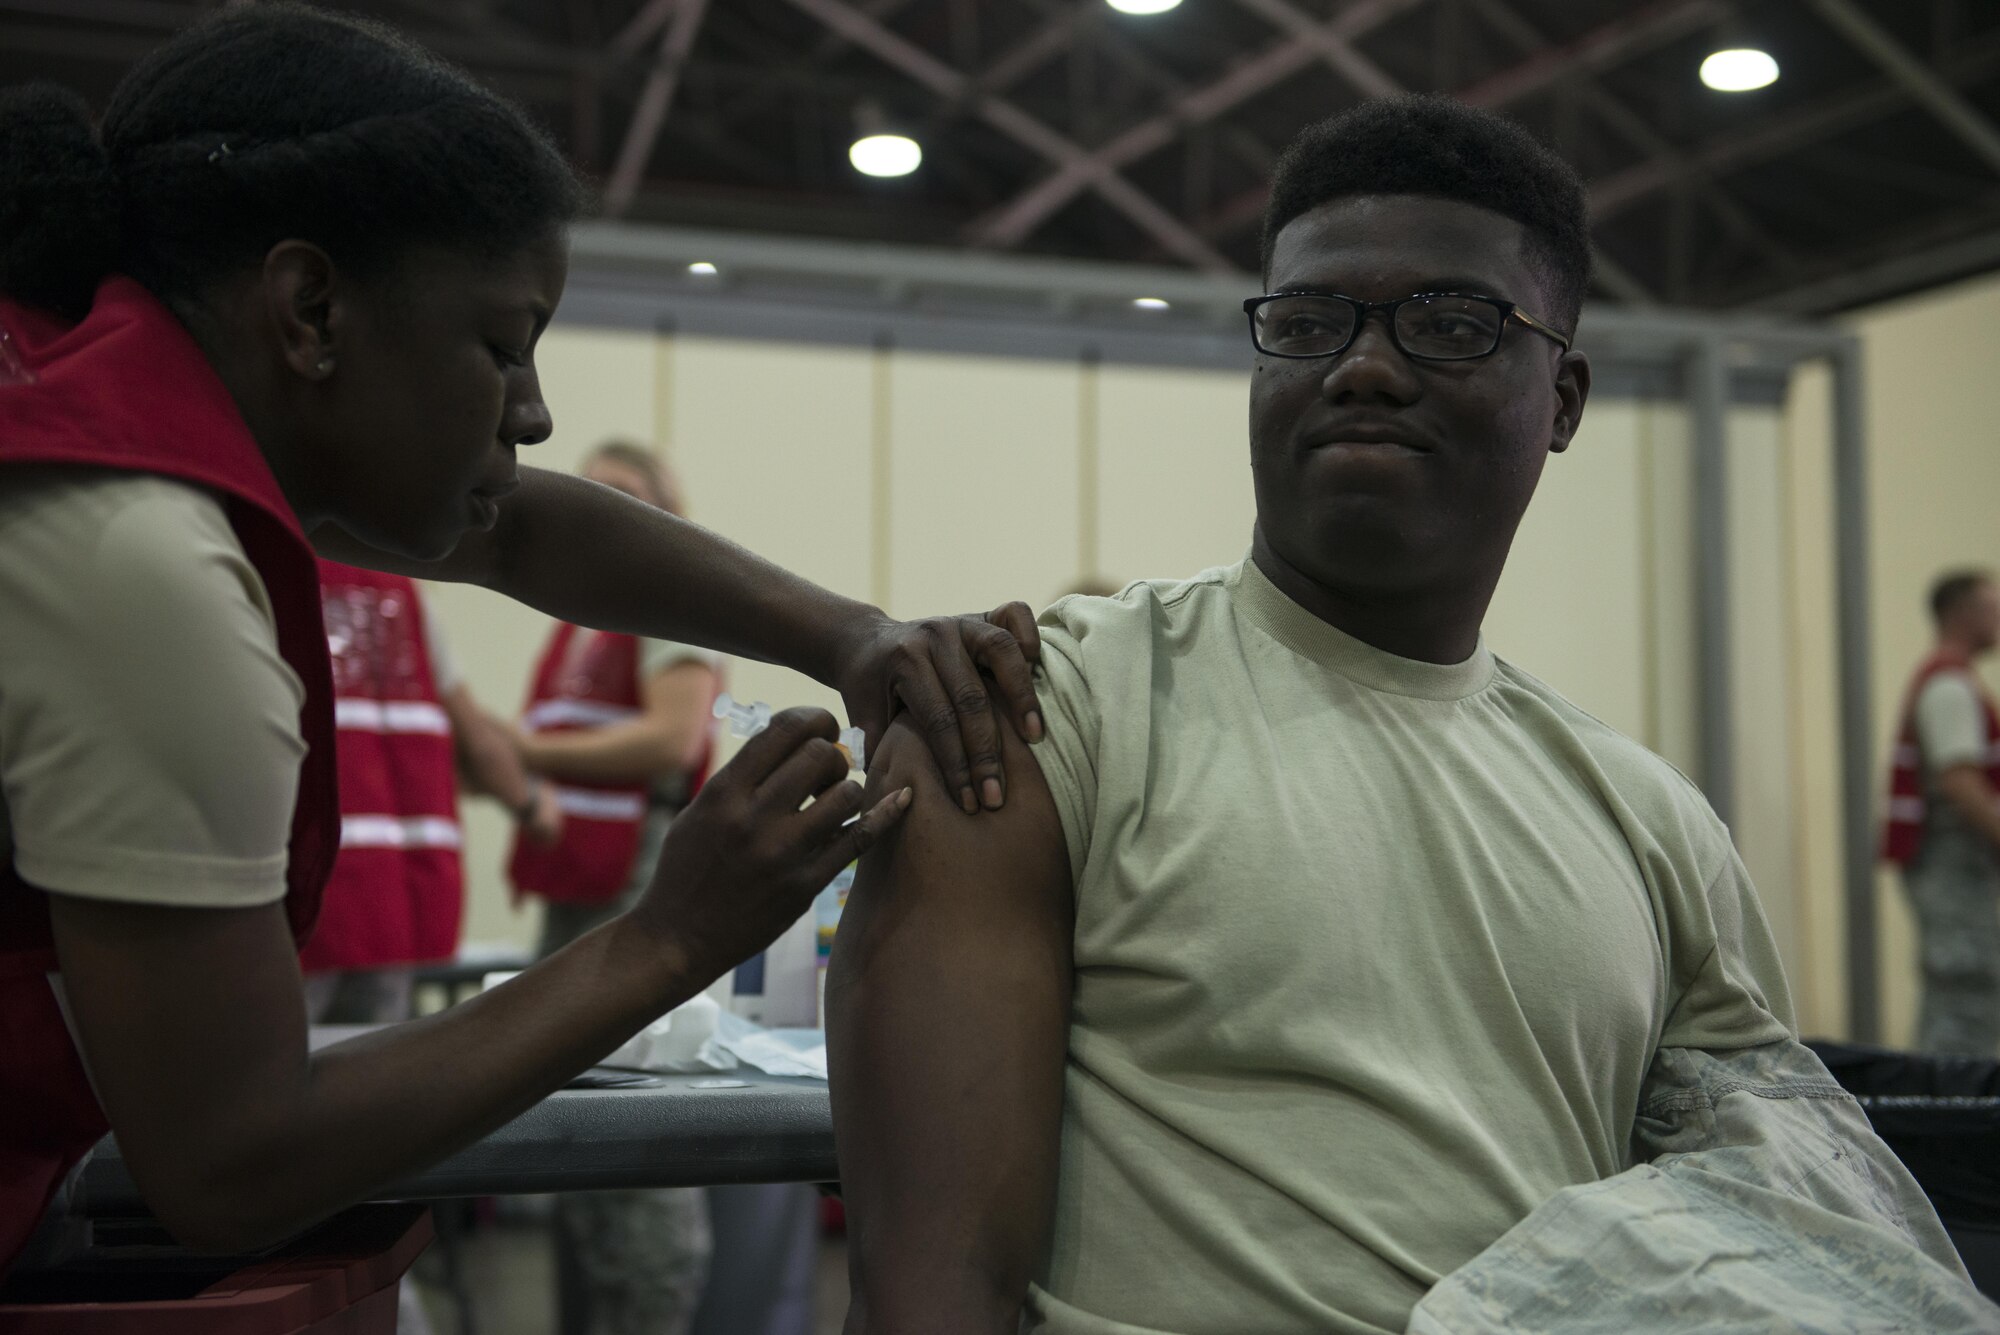 U.S. Air Force Tech. Sgt. Carmeilla Bethay, 39th Medical Operations Squadron clinical services flight chief, injects the influenza vaccine into Airman 1st Class James Gibson, 39th Security Forces Squadron Airman Oct. 15, 2016, at Incirlik Air Base, Turkey. Influenza vaccines are administered annually to all military personnel and civilians to prevent the spread of viruses in the upcoming flu season. (U.S. Air Force photo by Senior Airman Jasmonet Jackson)